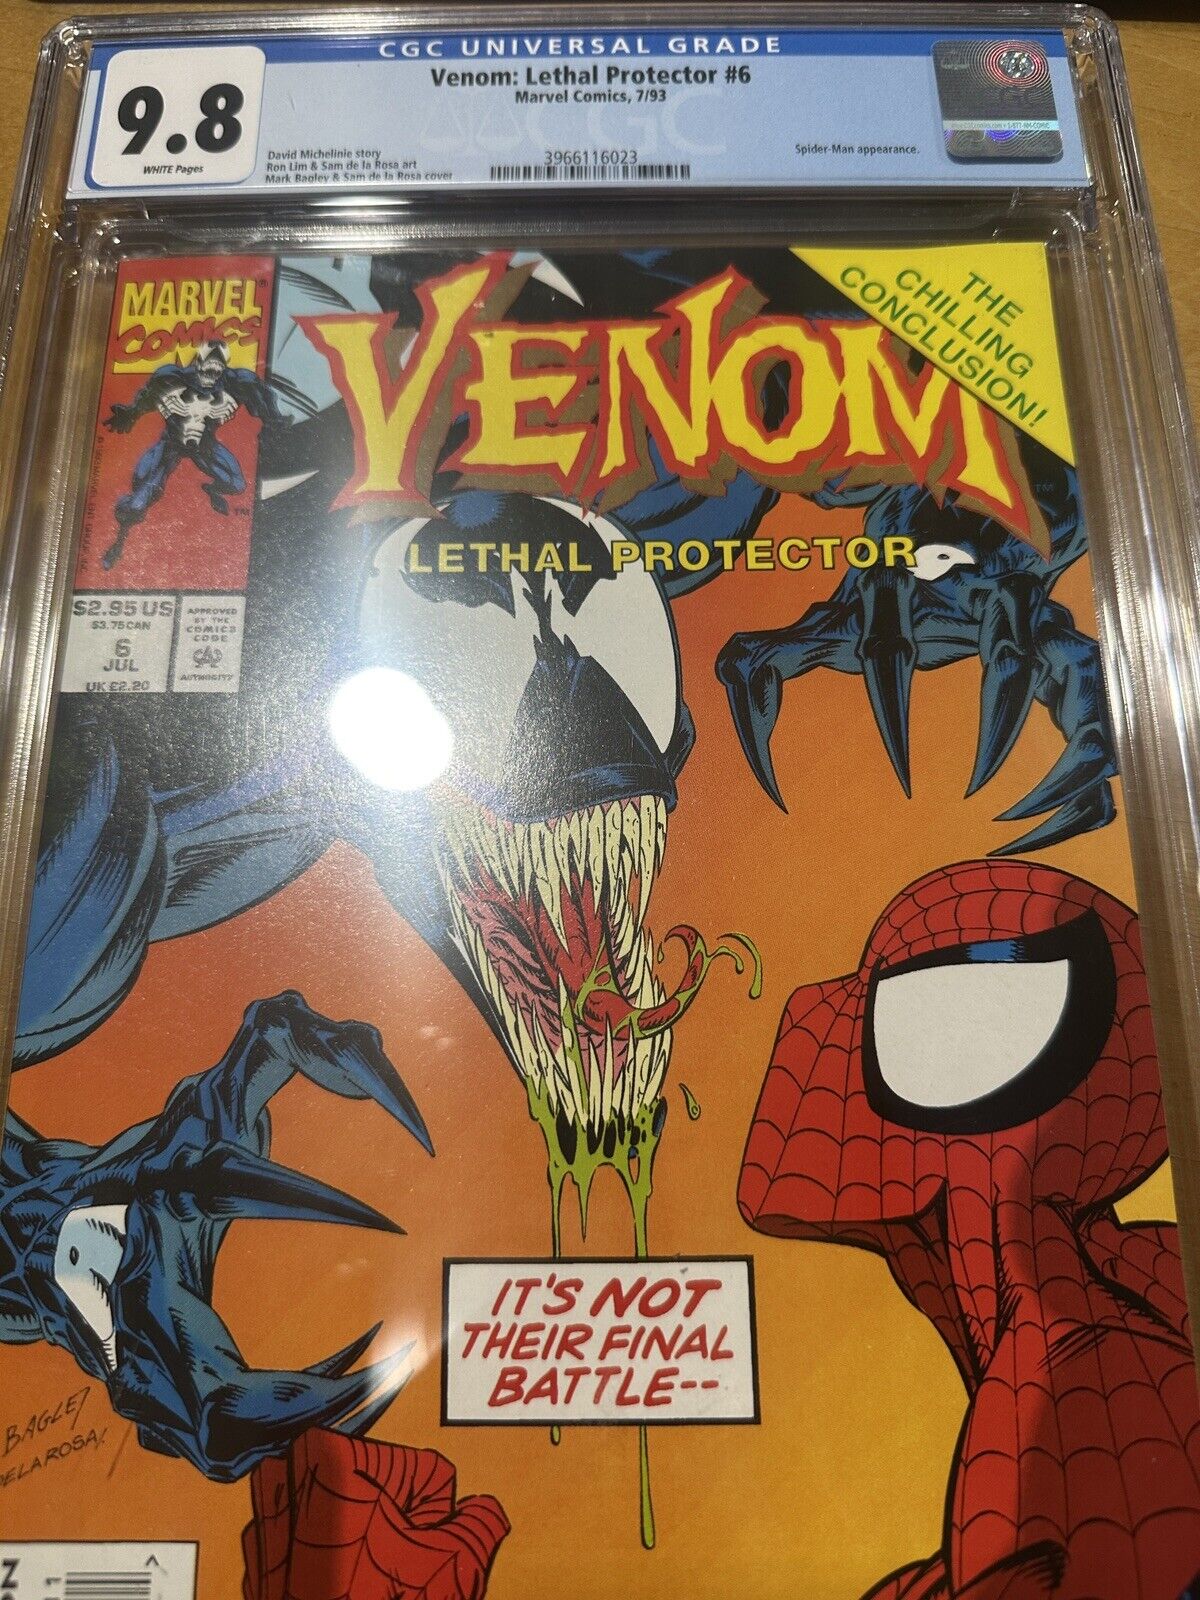 Venom: Lethal Protector #6 (1993) CGC 9.8  White Pages - SPIDER-MAN APP